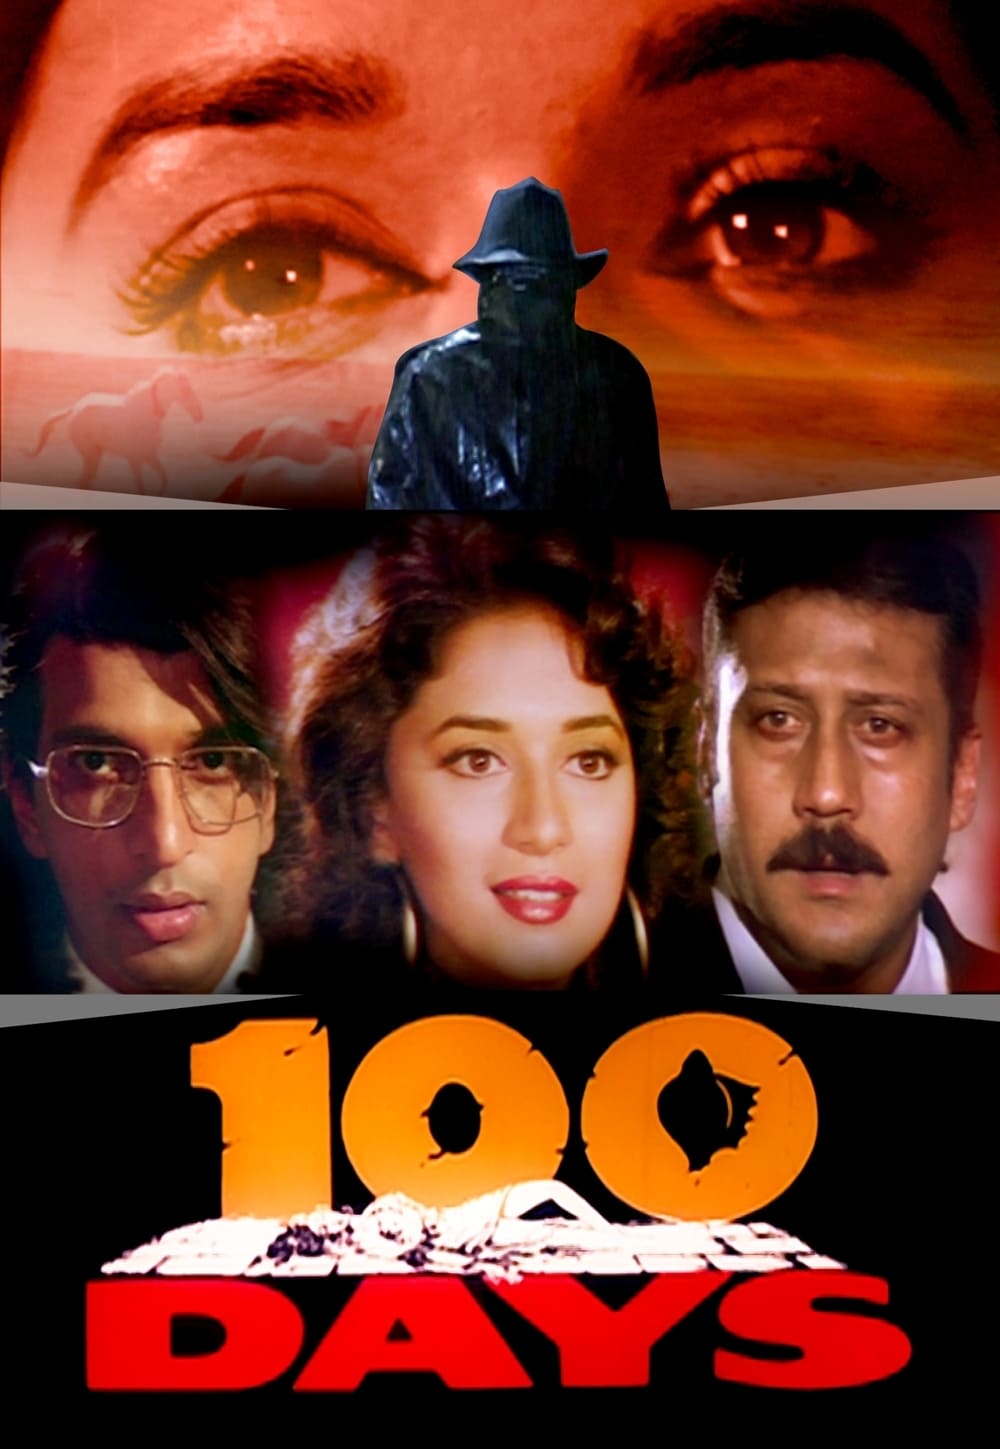 Poster for the movie "100 Days"